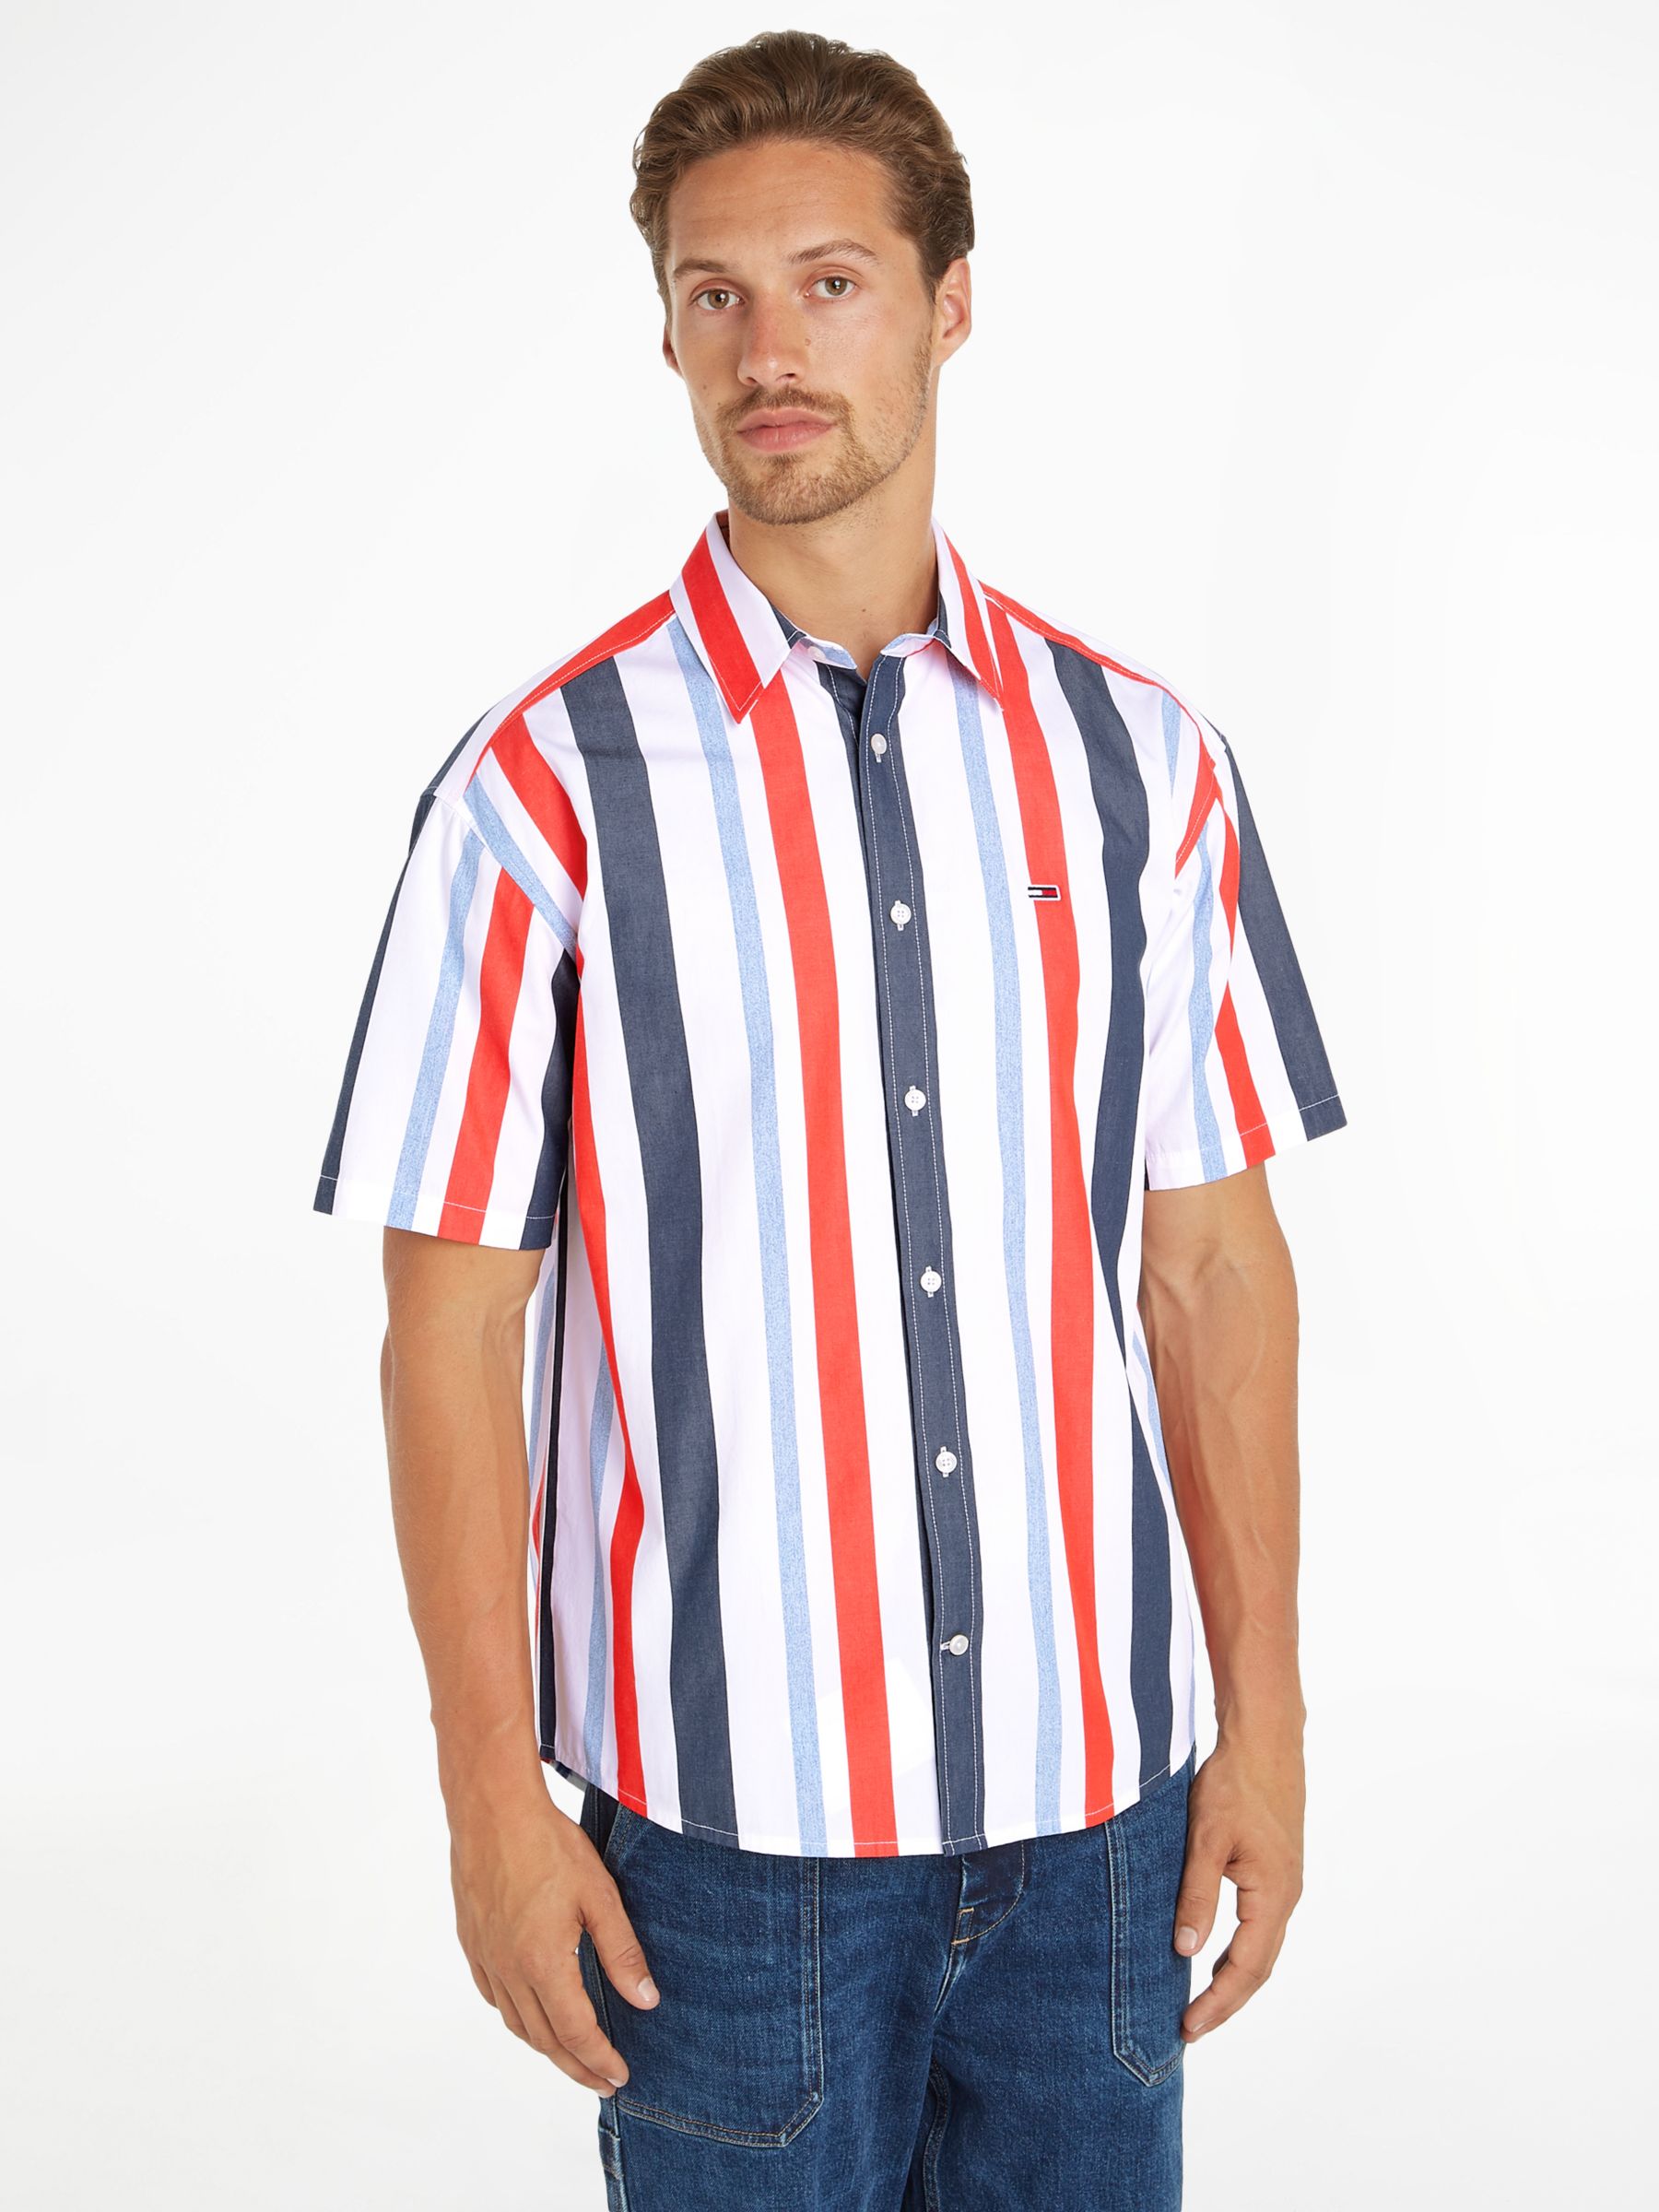 Tommy Jeans Relaxed Stripe T-Shirt, Multi, M